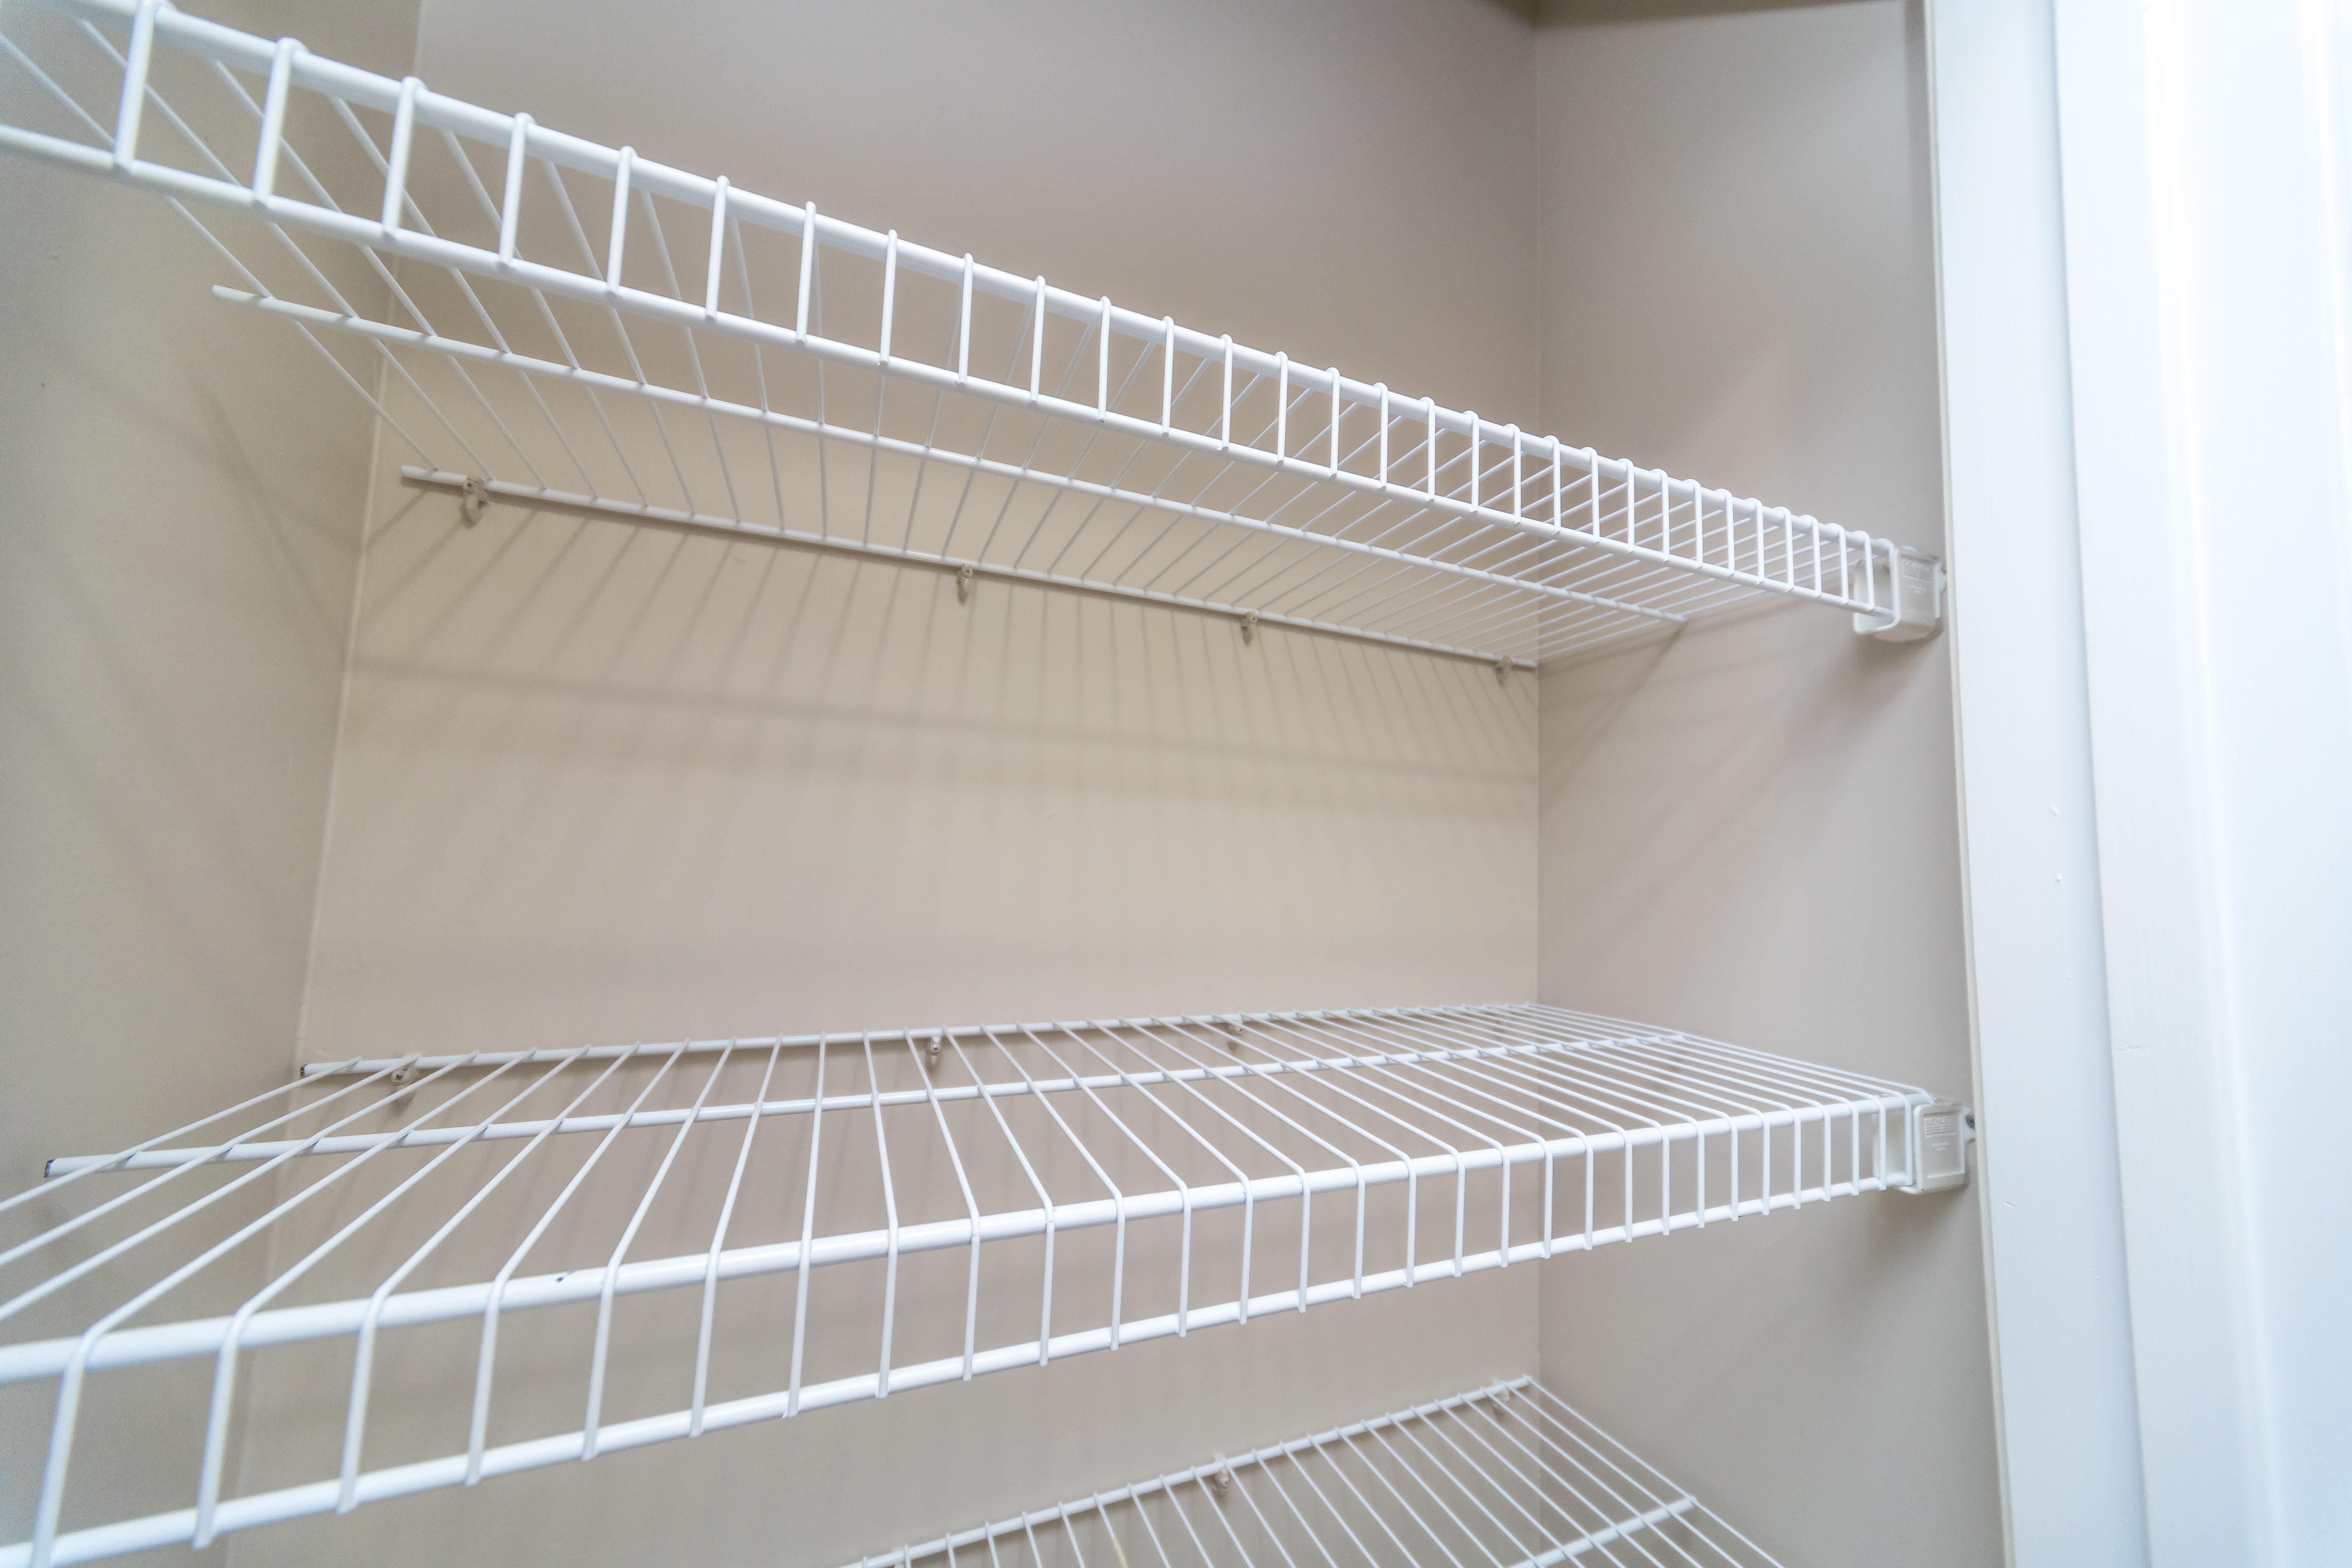 How to Clean Wire Closet Shelving | eHow